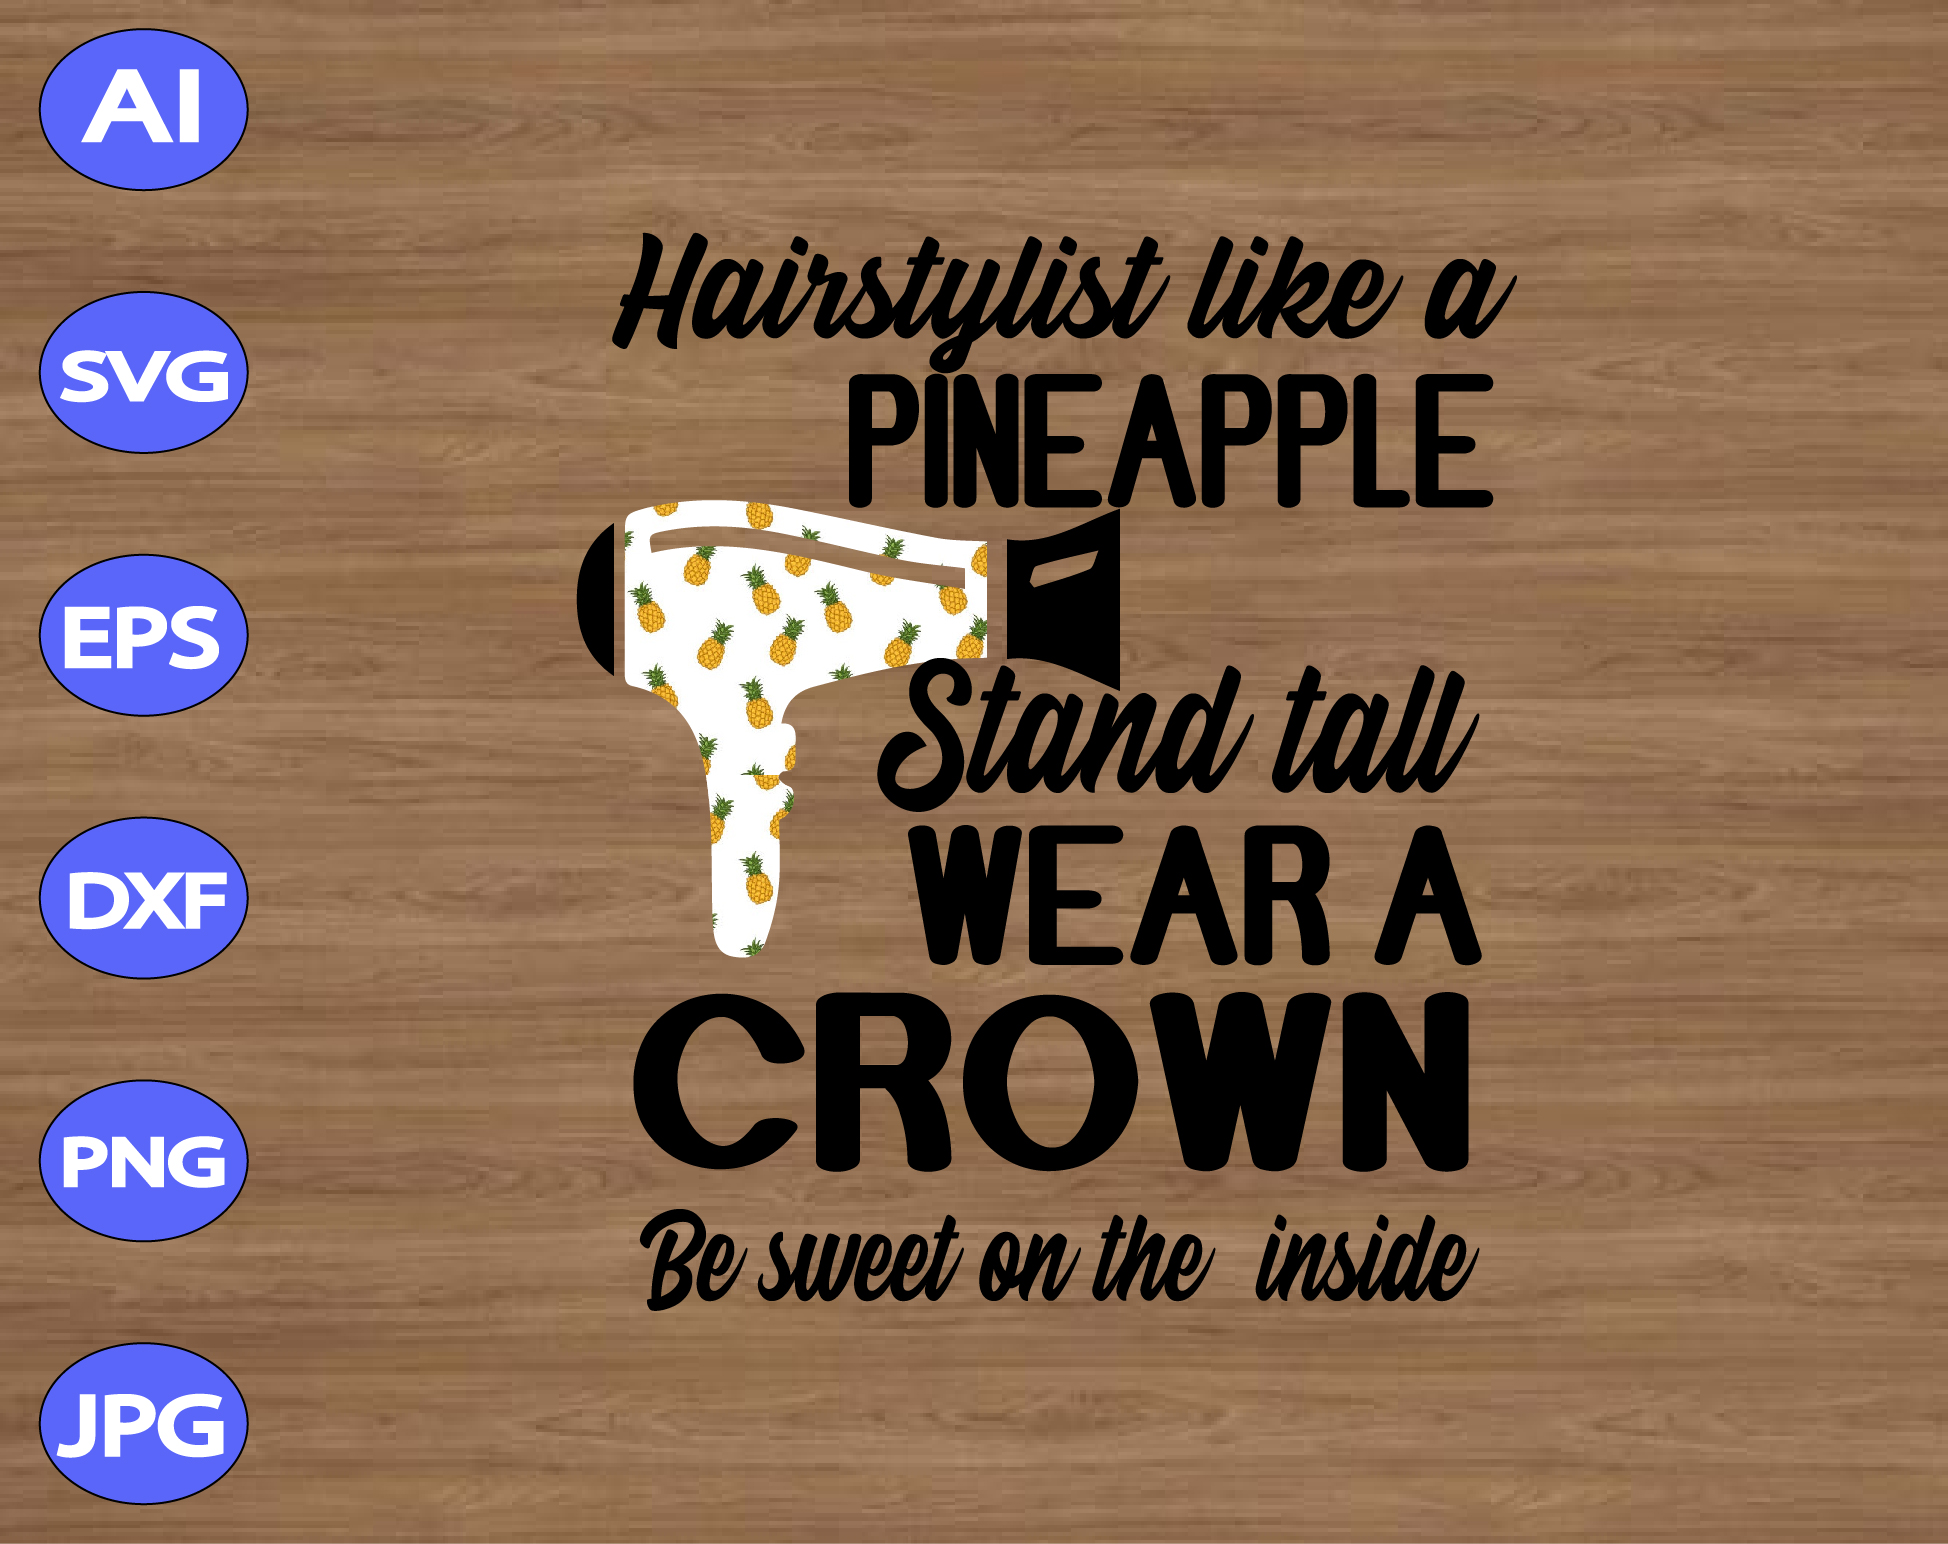 Teach Like A Pineapple Stand Tall Have A Tough Outer Shell But Remain Sweet Inside Pineapples Are The New Apples Svg Dxf Eps Png Digital Download Designbtf Com